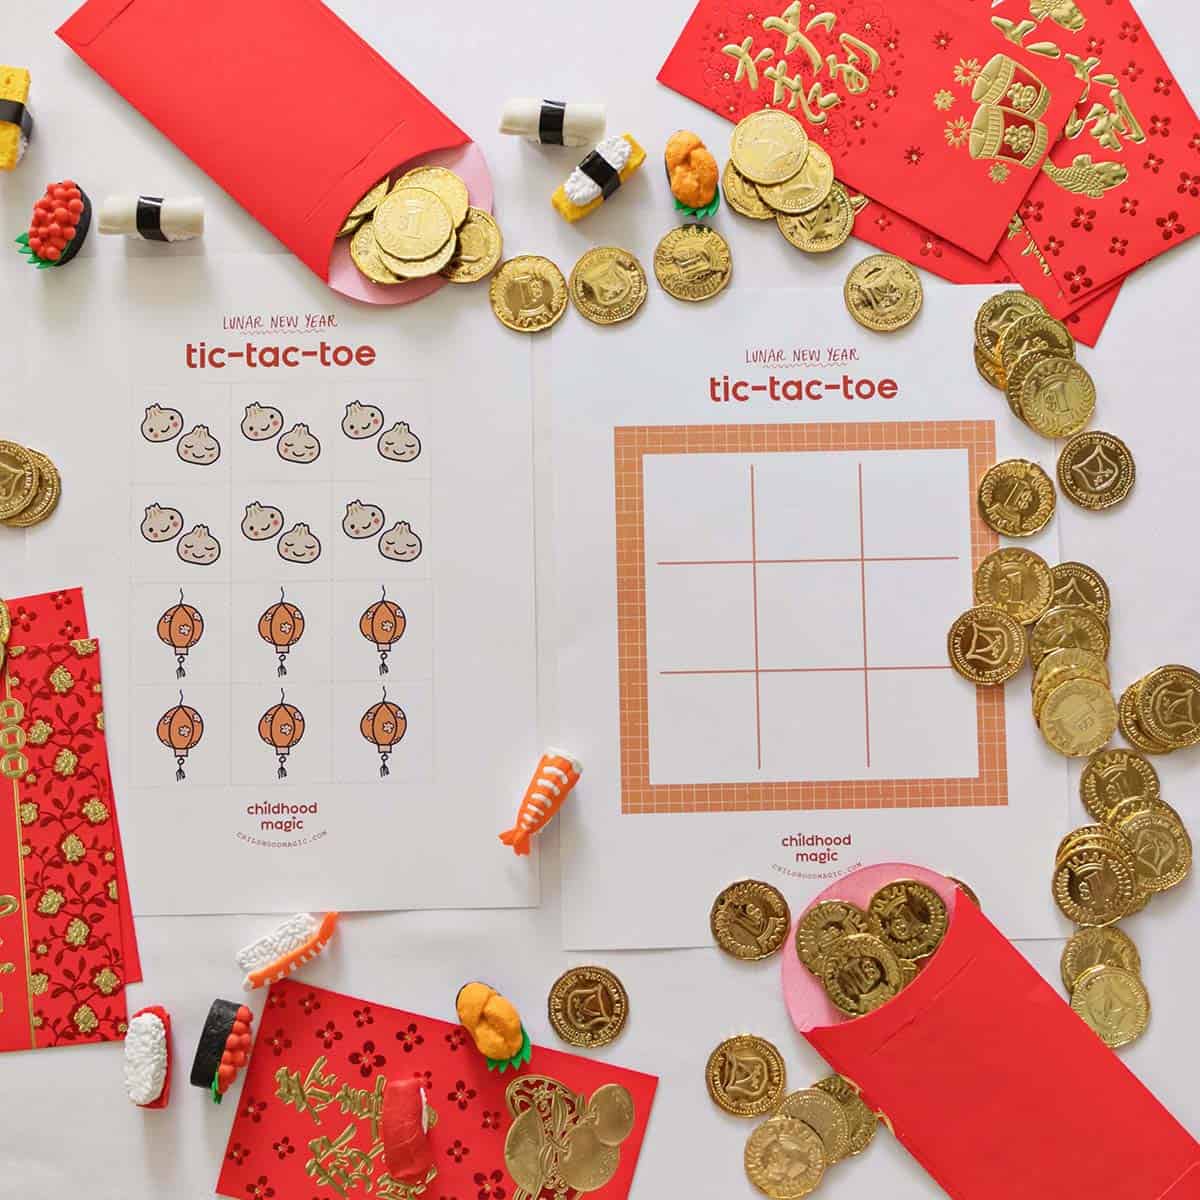 printable lunar new year themed tic tac toe board and tokens. 